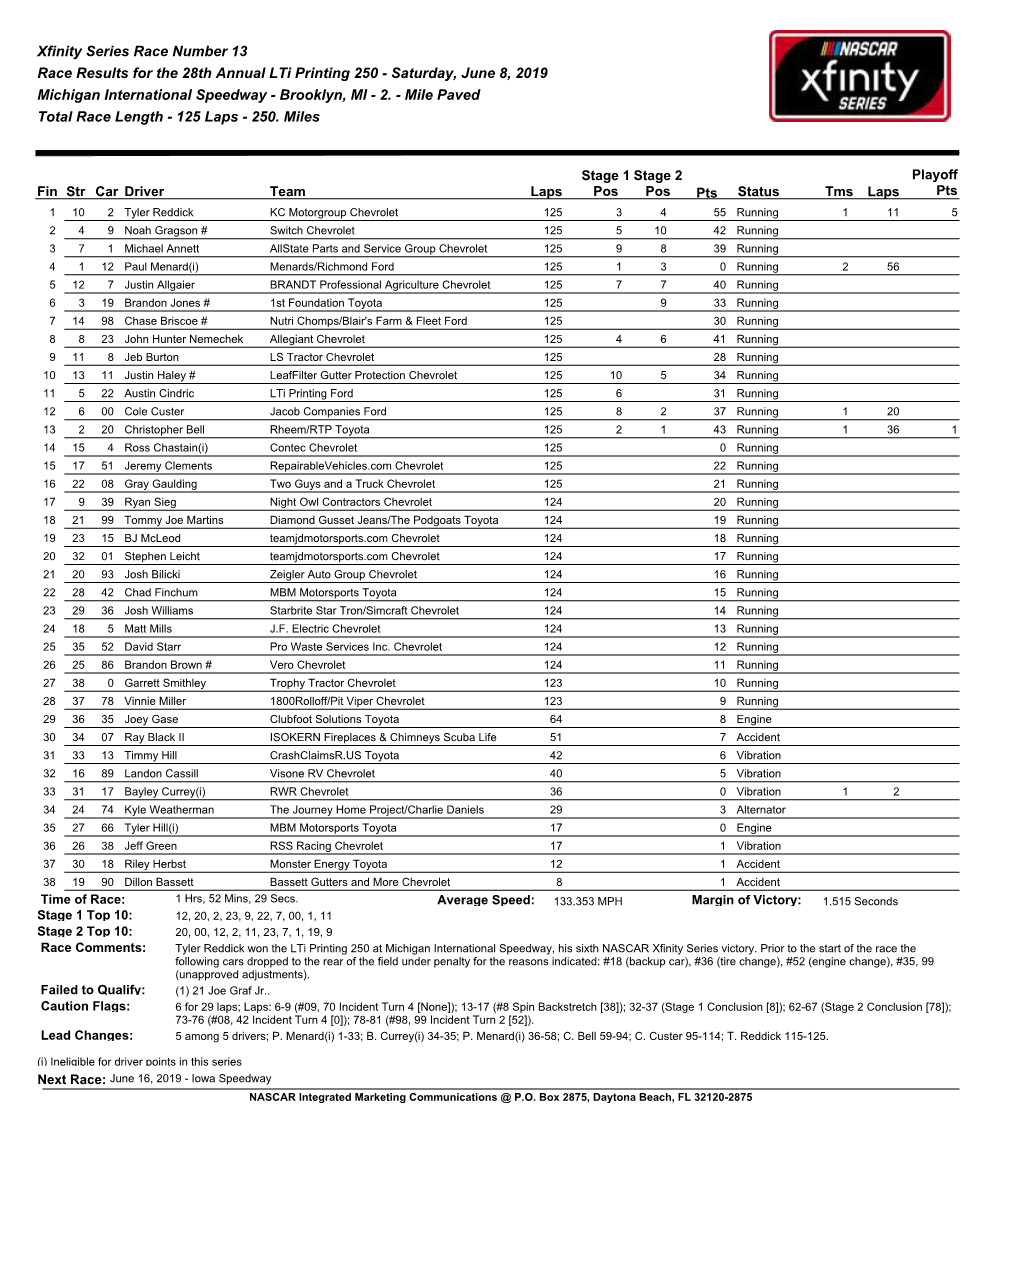 Xfinity Series Race Number 13 Race Results for the 28Th Annual Lti Printing 250 - Saturday, June 8, 2019 Michigan International Speedway - Brooklyn, MI - 2